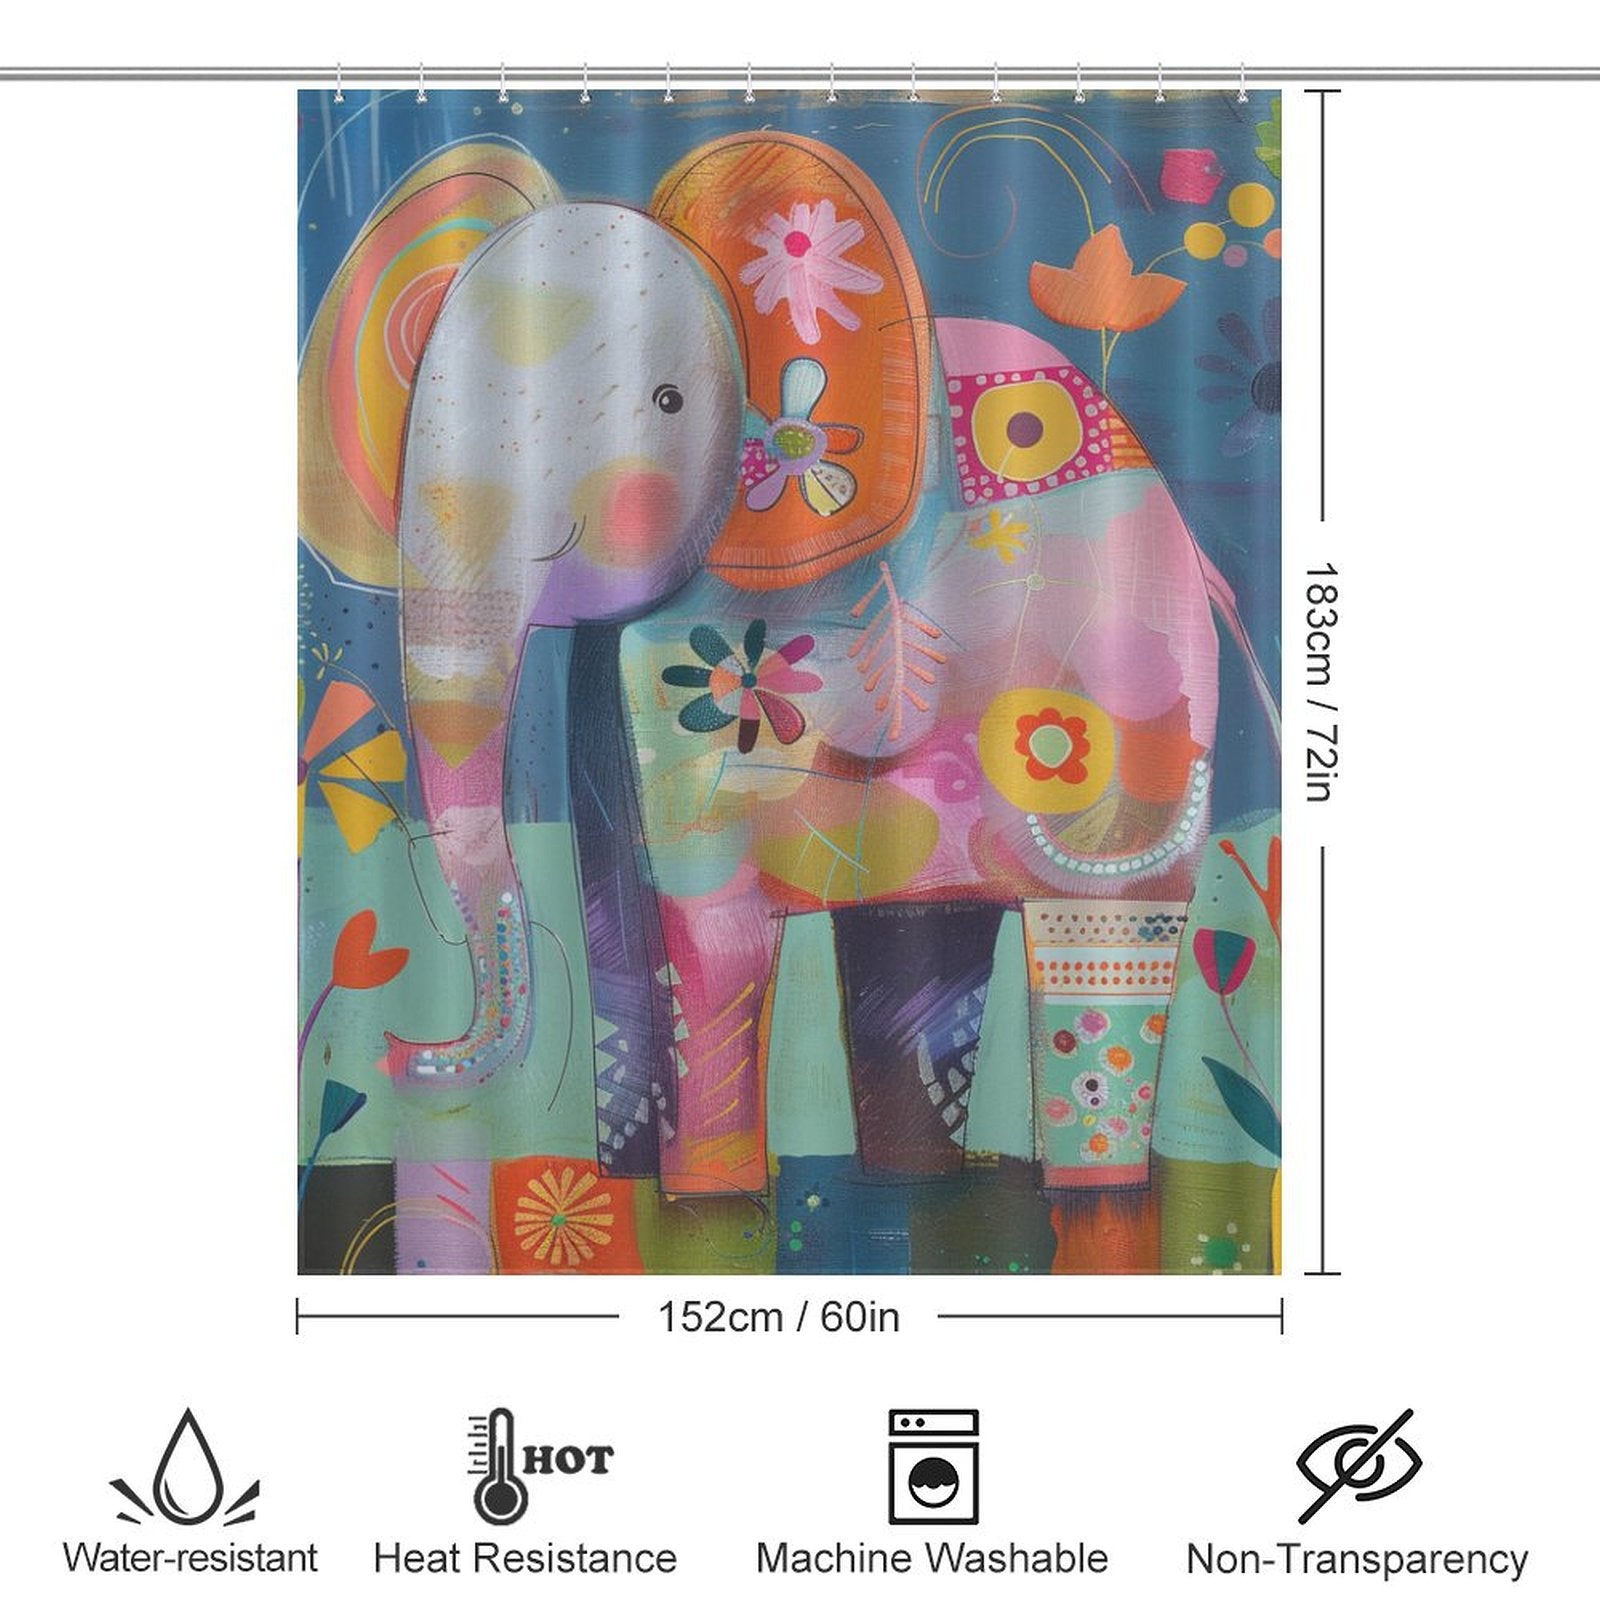 A whimsical shower curtain featuring a cute baby cartoon elephant design with flowers and patterns. Dimensions are 183 cm x 152 cm, and it is water-resistant, heat-resistant, machine washable, and non-transparent. The Cotton Cat Cute Baby Cartoon Elephant Shower Curtain-Cottoncat is perfect for adding charming bathroom decor.